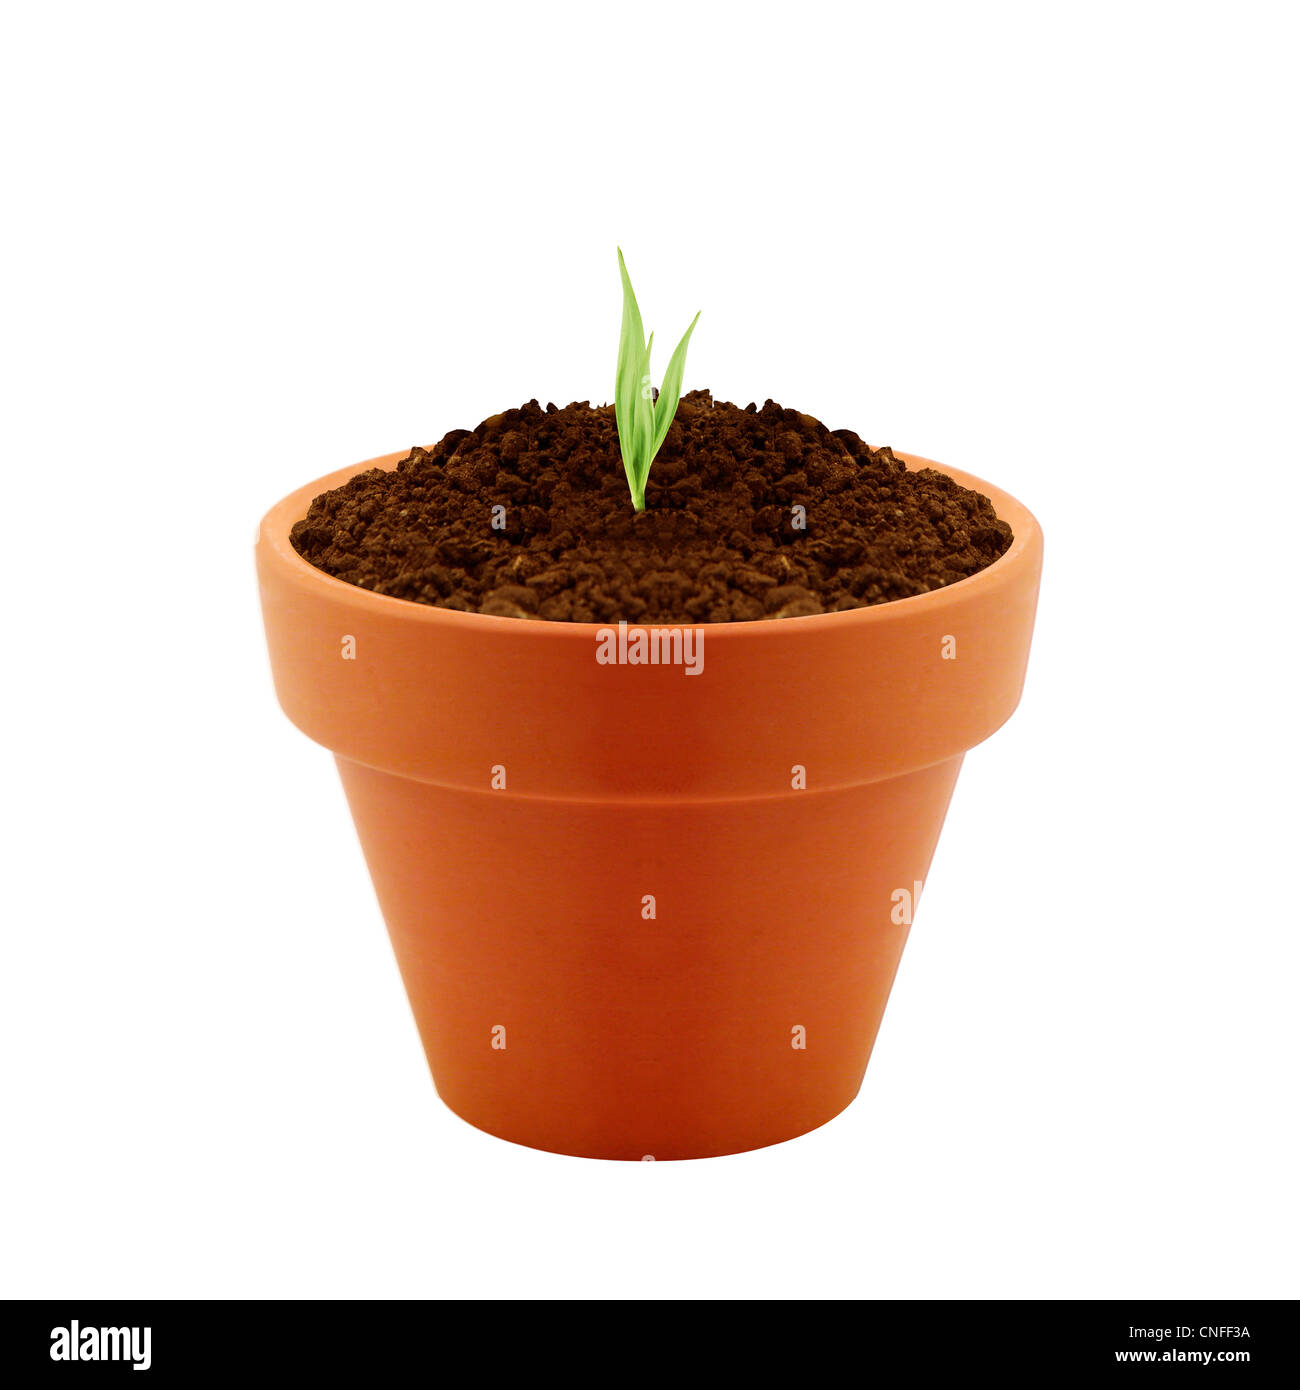 Young plant in clay pot isolated on white background. Stock Photo